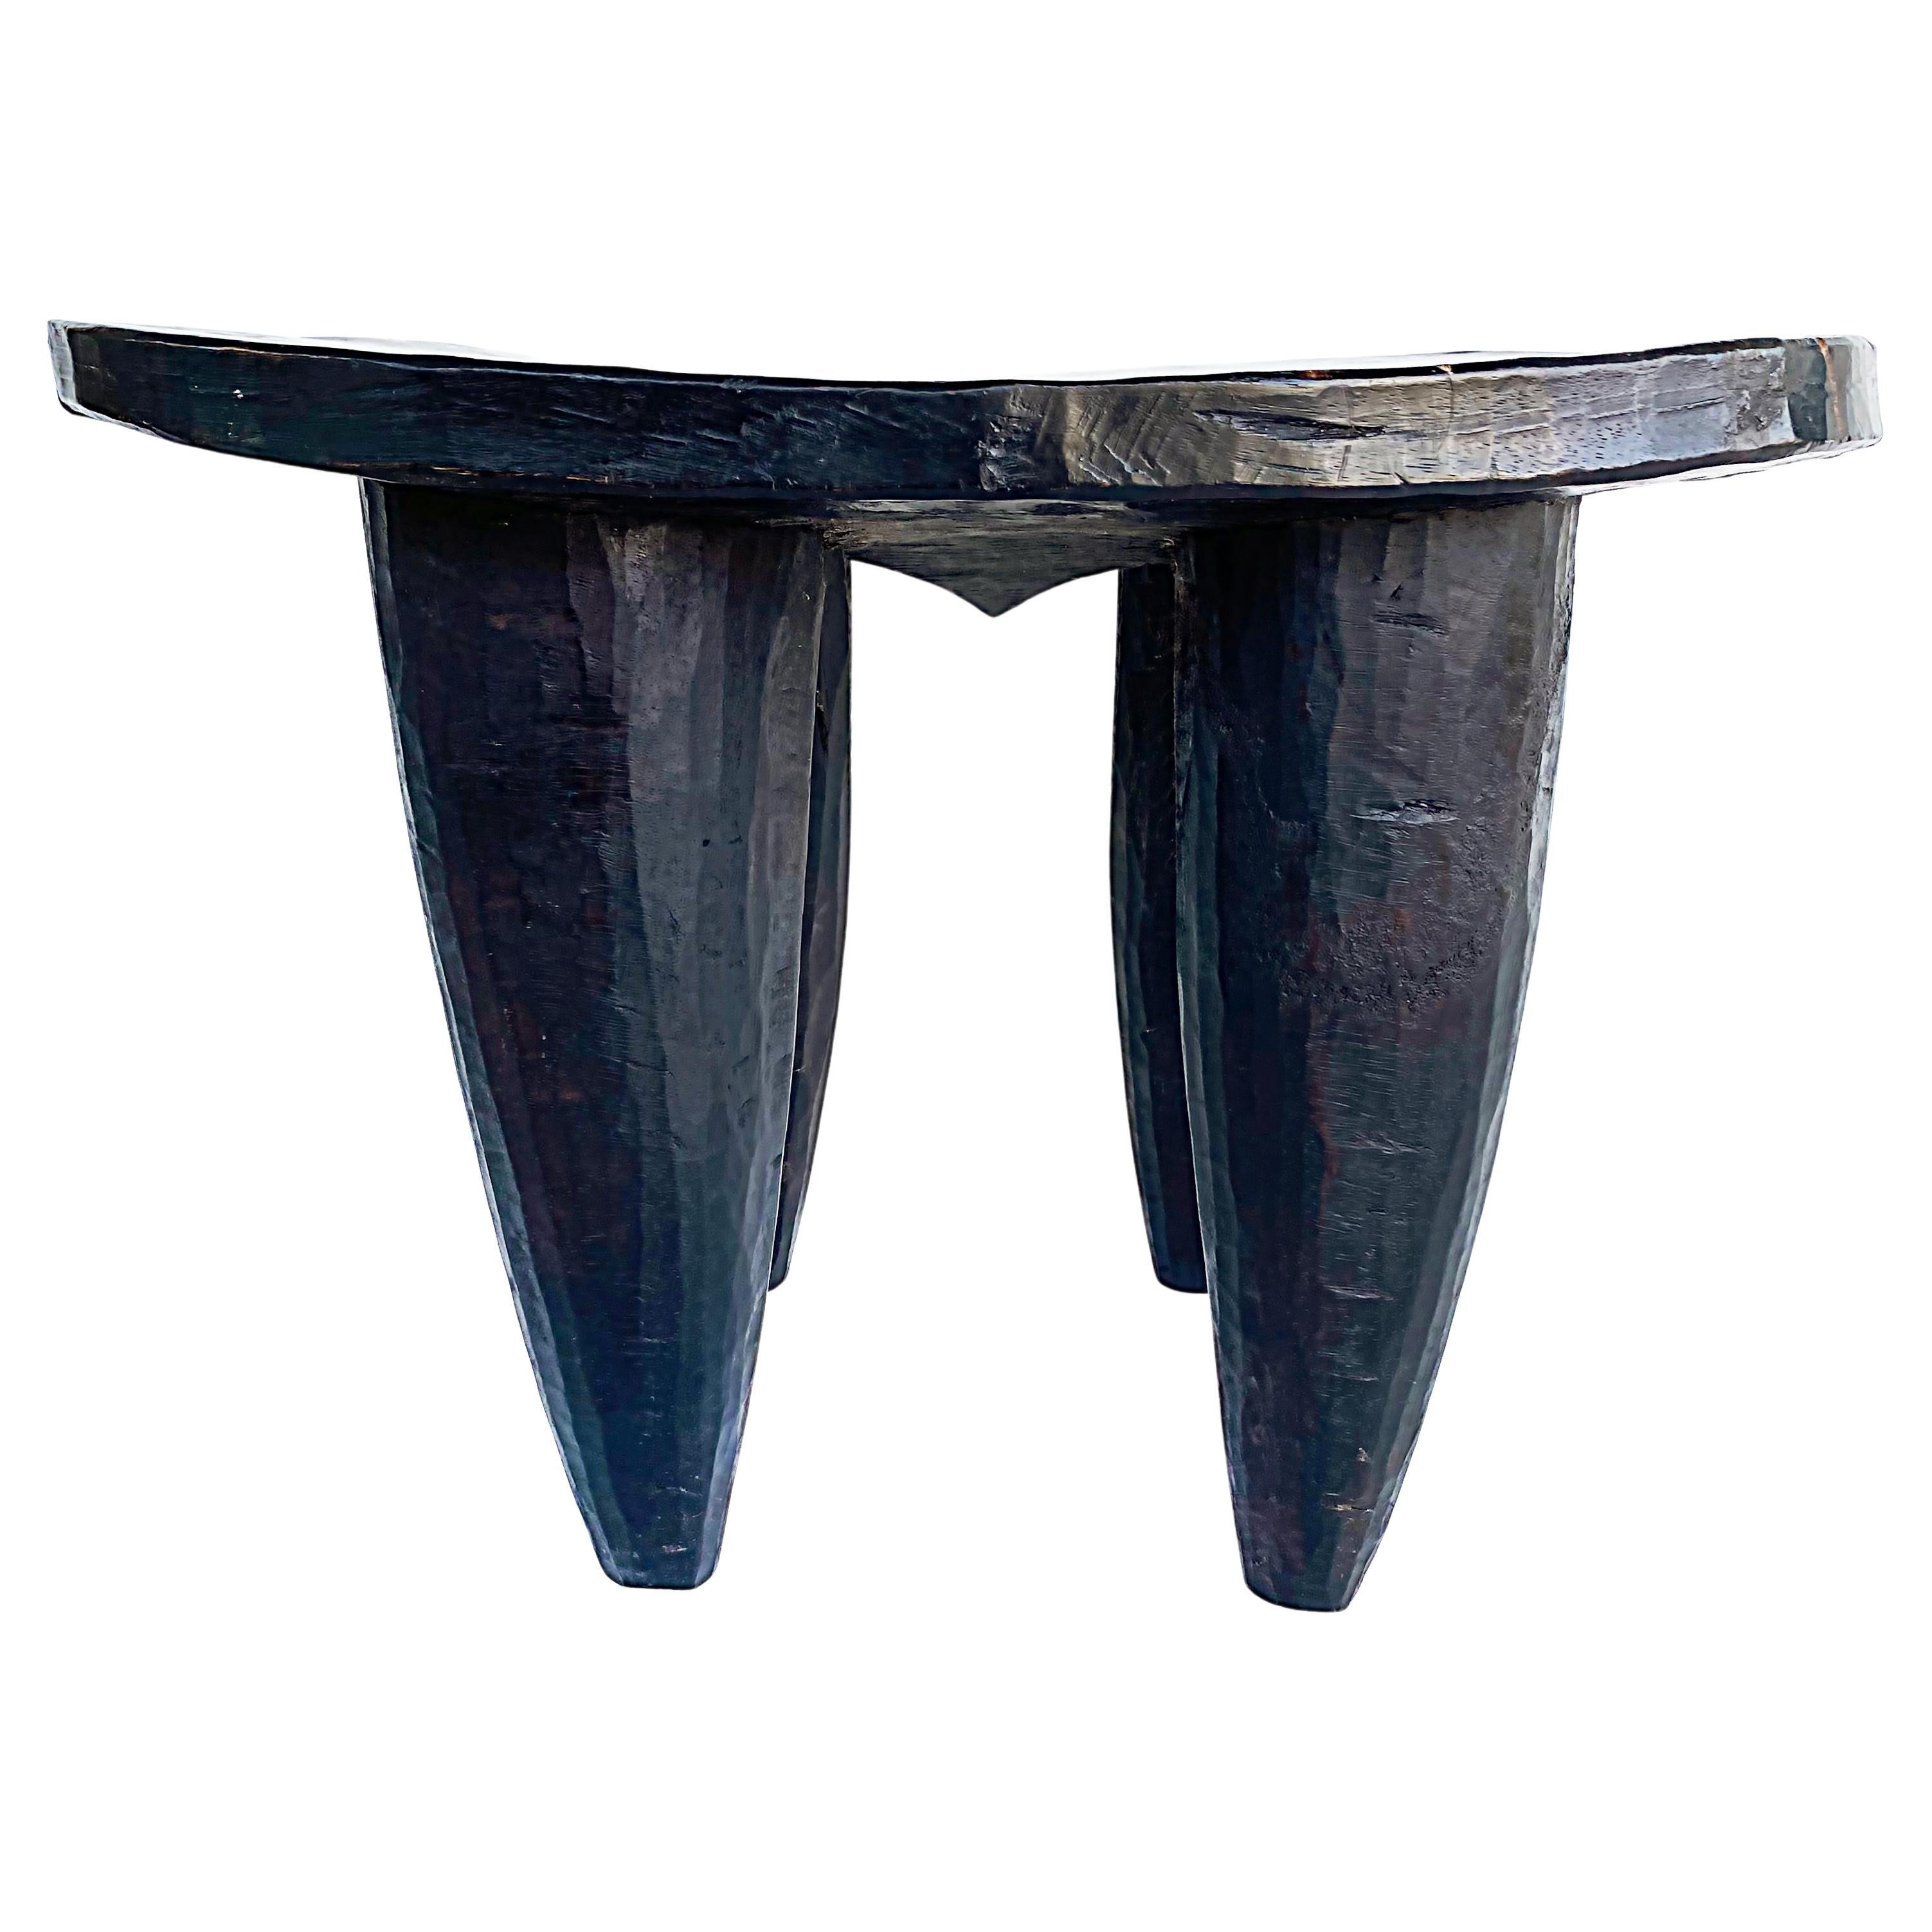 African Senufo Stool or Table from Cote d'Ivoire, Late 20th Century